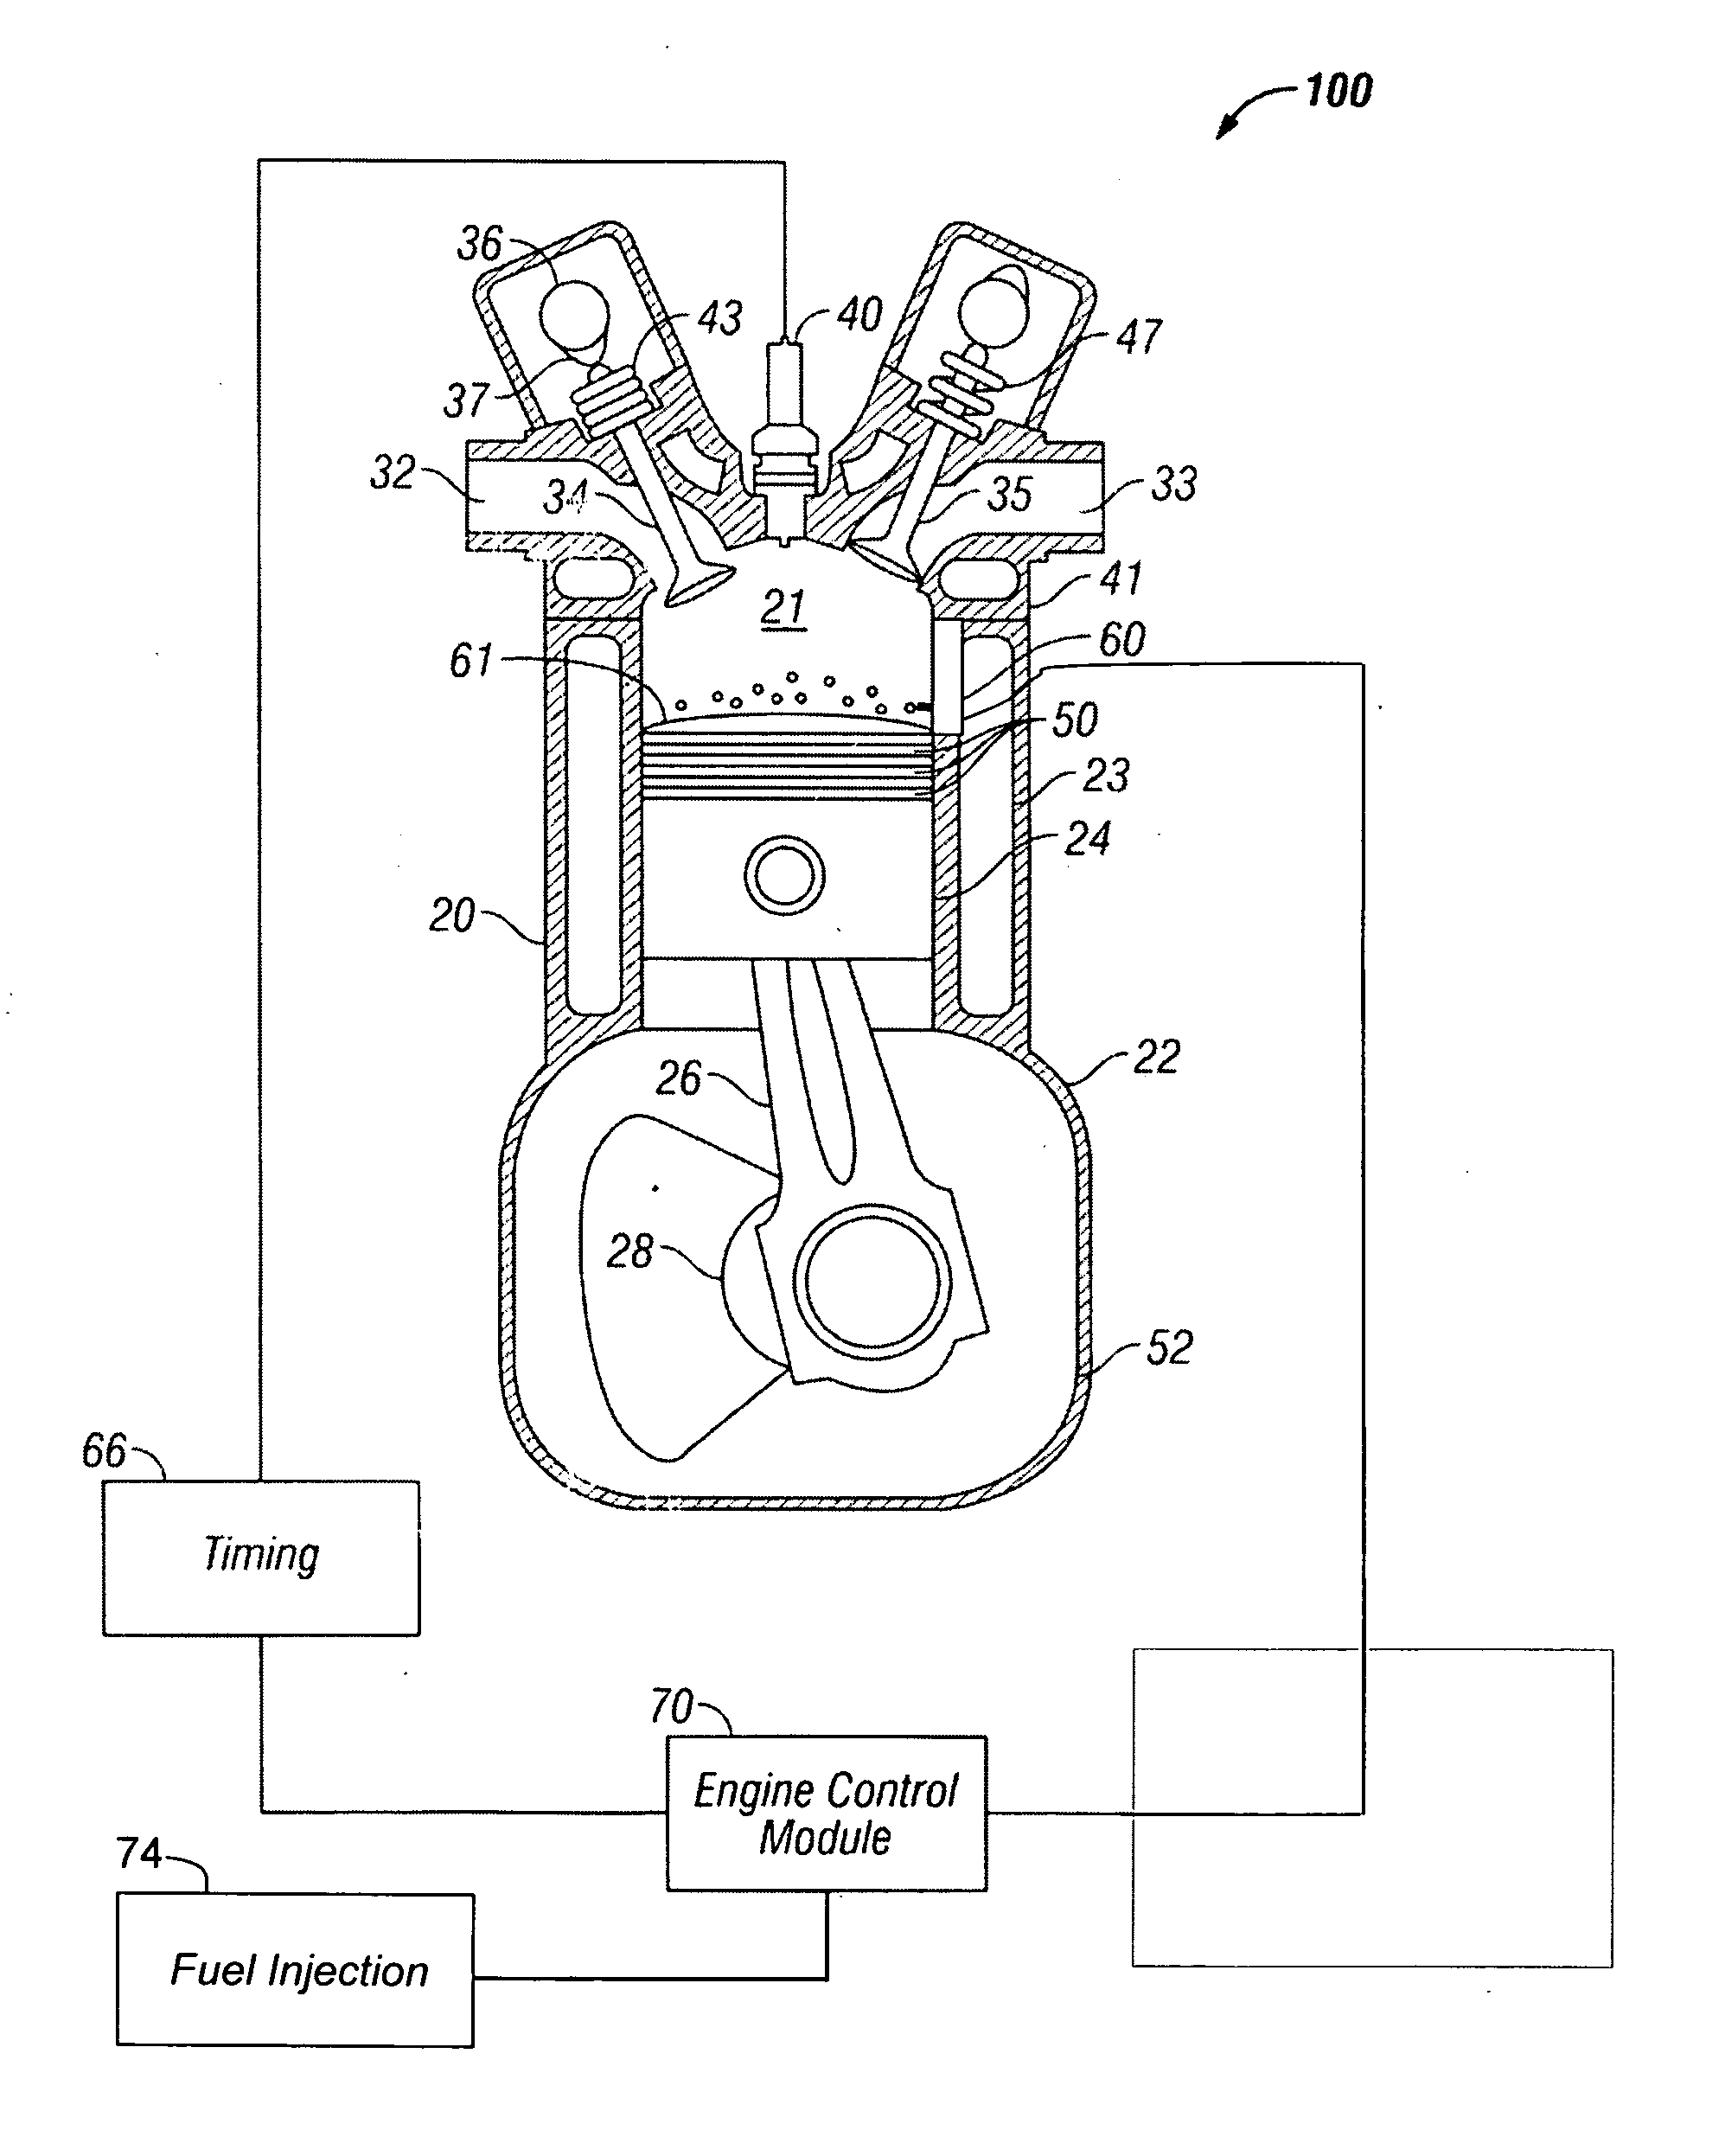 Methods of detecting pre-ignition and preventing it from causing knock in direct injection spark ignition engines